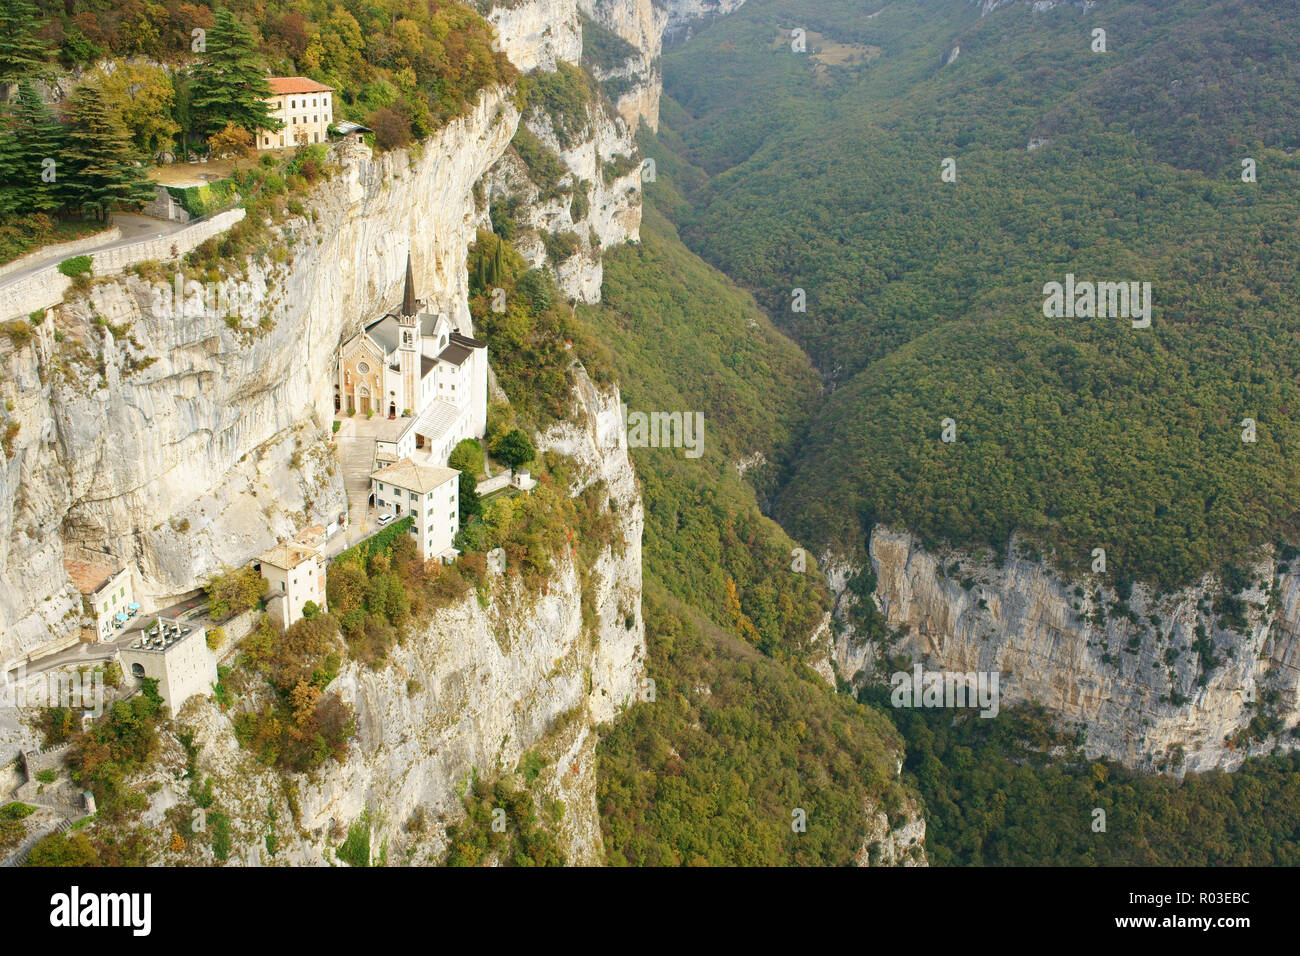 AERIAL VIEW from a 6-meter mast. Sanctuary on a ledge on a rock face. Sanctuary of Madonna della Corona. Spiazzi, Province of Verona, Veneto, Italy. Stock Photo